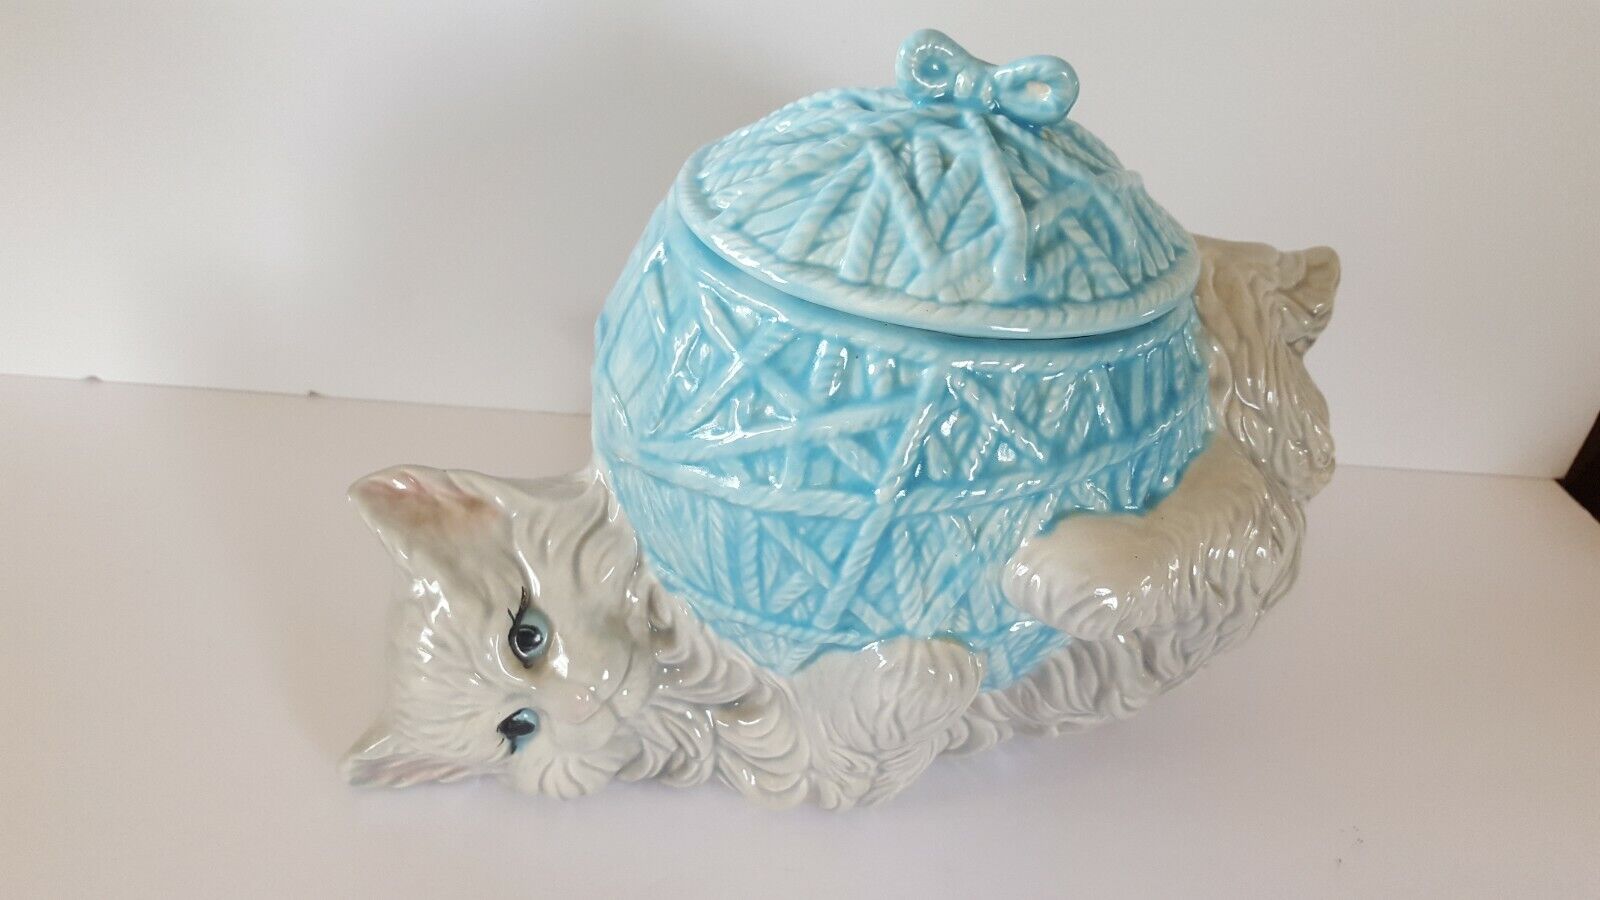 VTG GRAY KITTEN WITH BLUE EYES PLAYING WITH BALL OF YARN COOKIE JAR Marianne